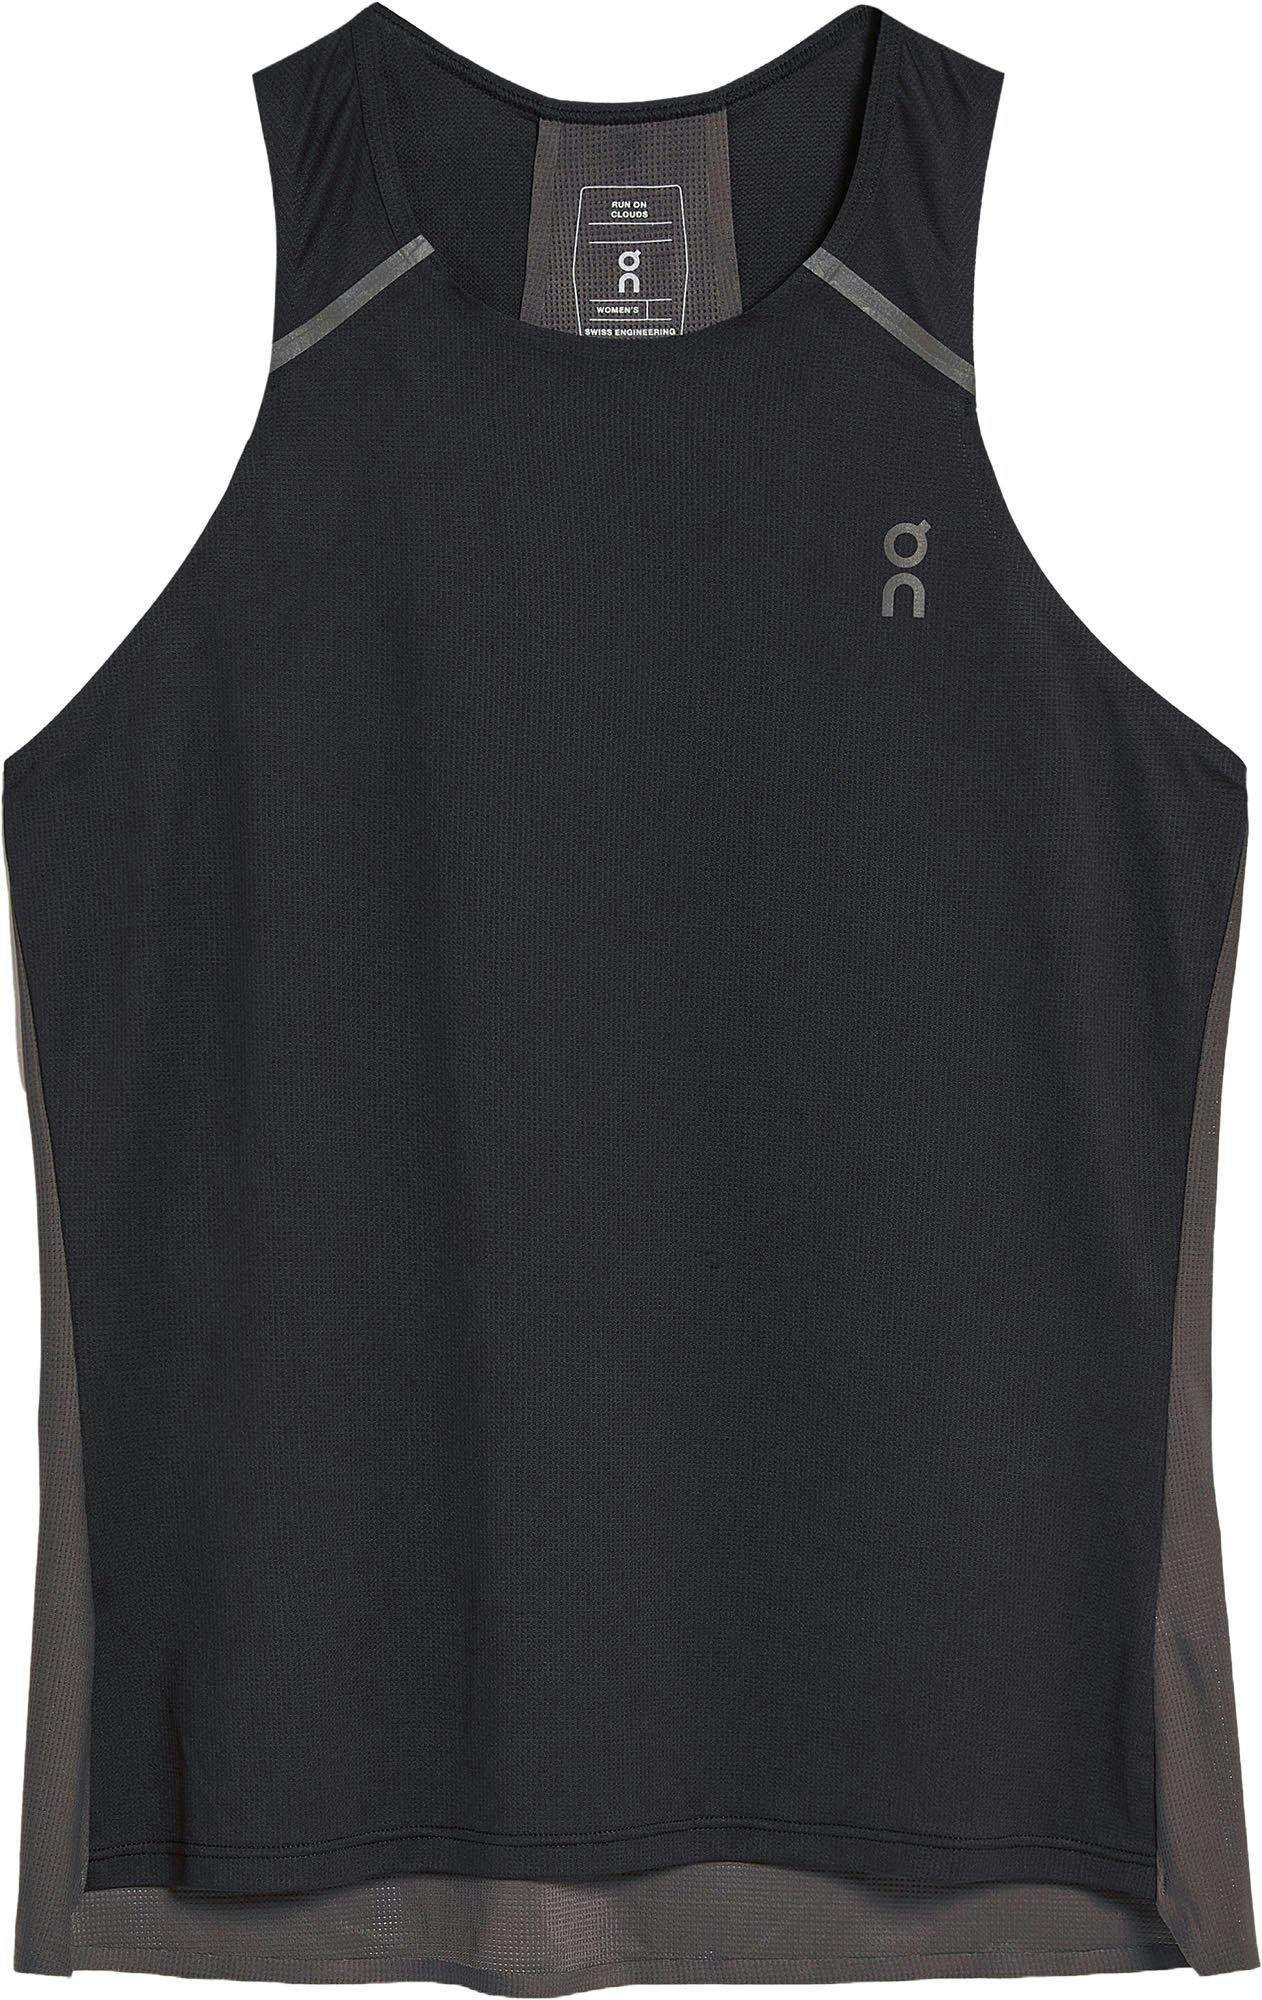 Product image for Performance Tank - Women's